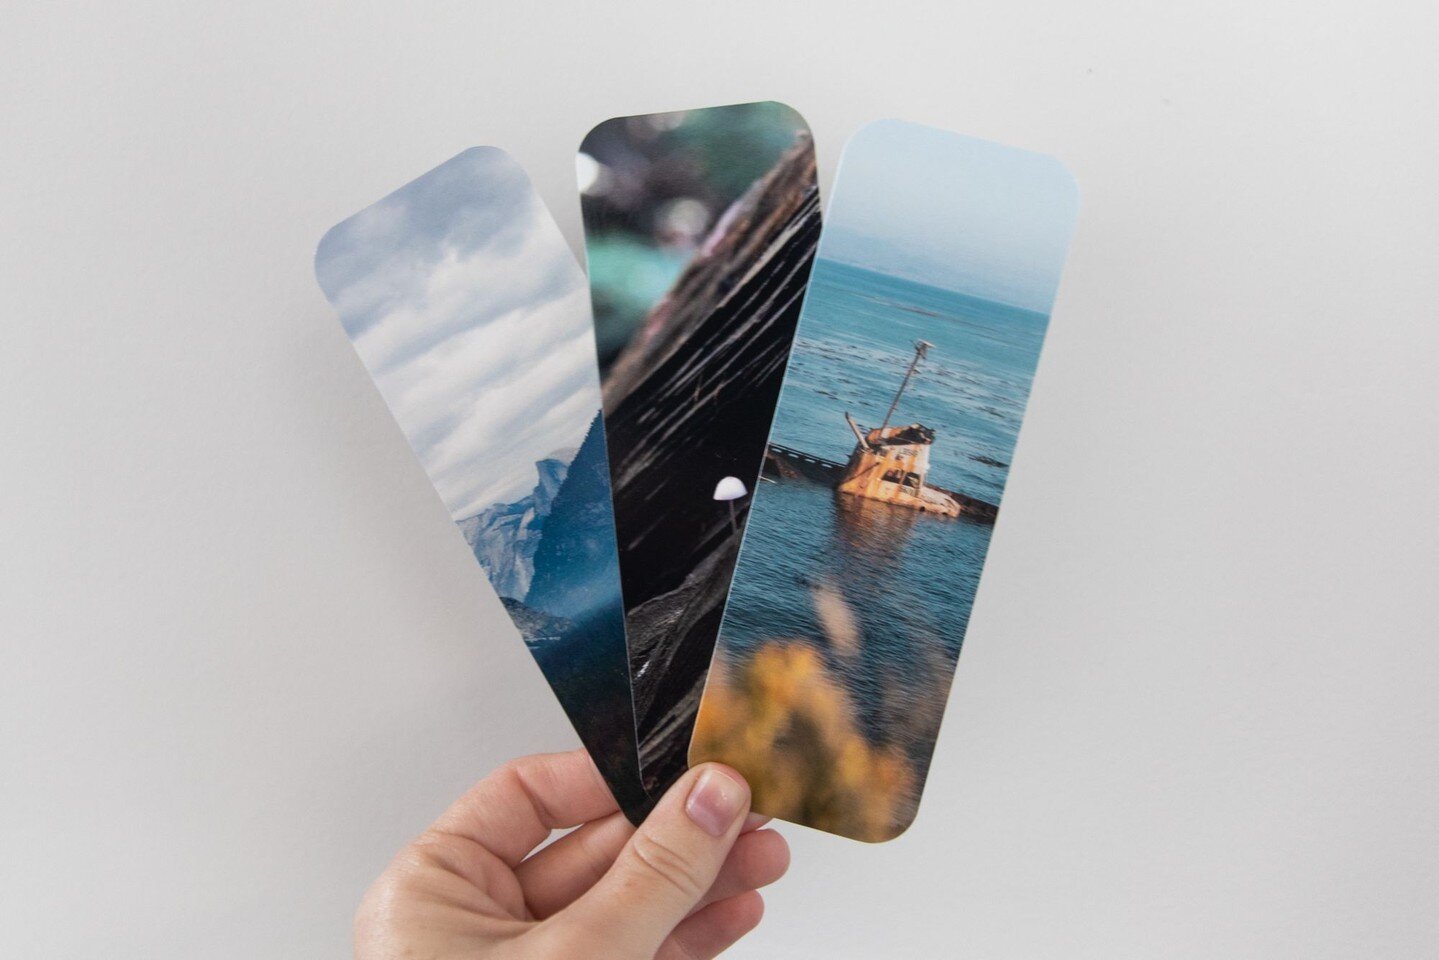 Each of these bookmarks reminds me of a fun adventure, which makes them especially fitting to use in books I read.

#bookmarks #travelphotography #yosemite #yosemitenationalpark #yosemitevalley #tunnelview #halfdome #limekilnstatepark #bigsur #mushro